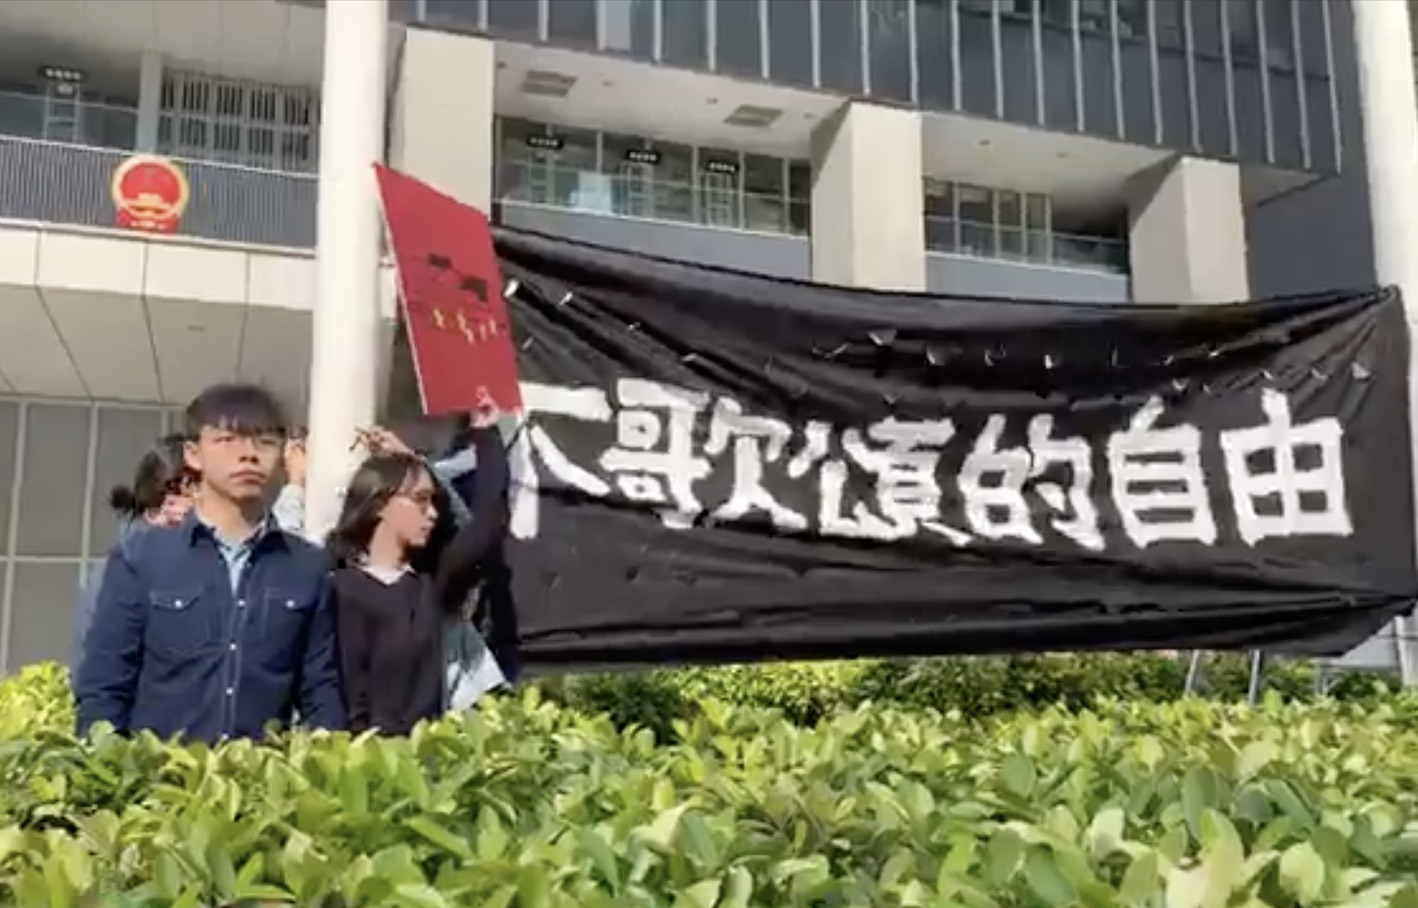 Pro-democracy activists Joshua Wong (left) and Agnes Chow (right) protest the national anthem law at Civic Square outside the Central Government offices. Screengrab  via Facebook video/Demosistō.